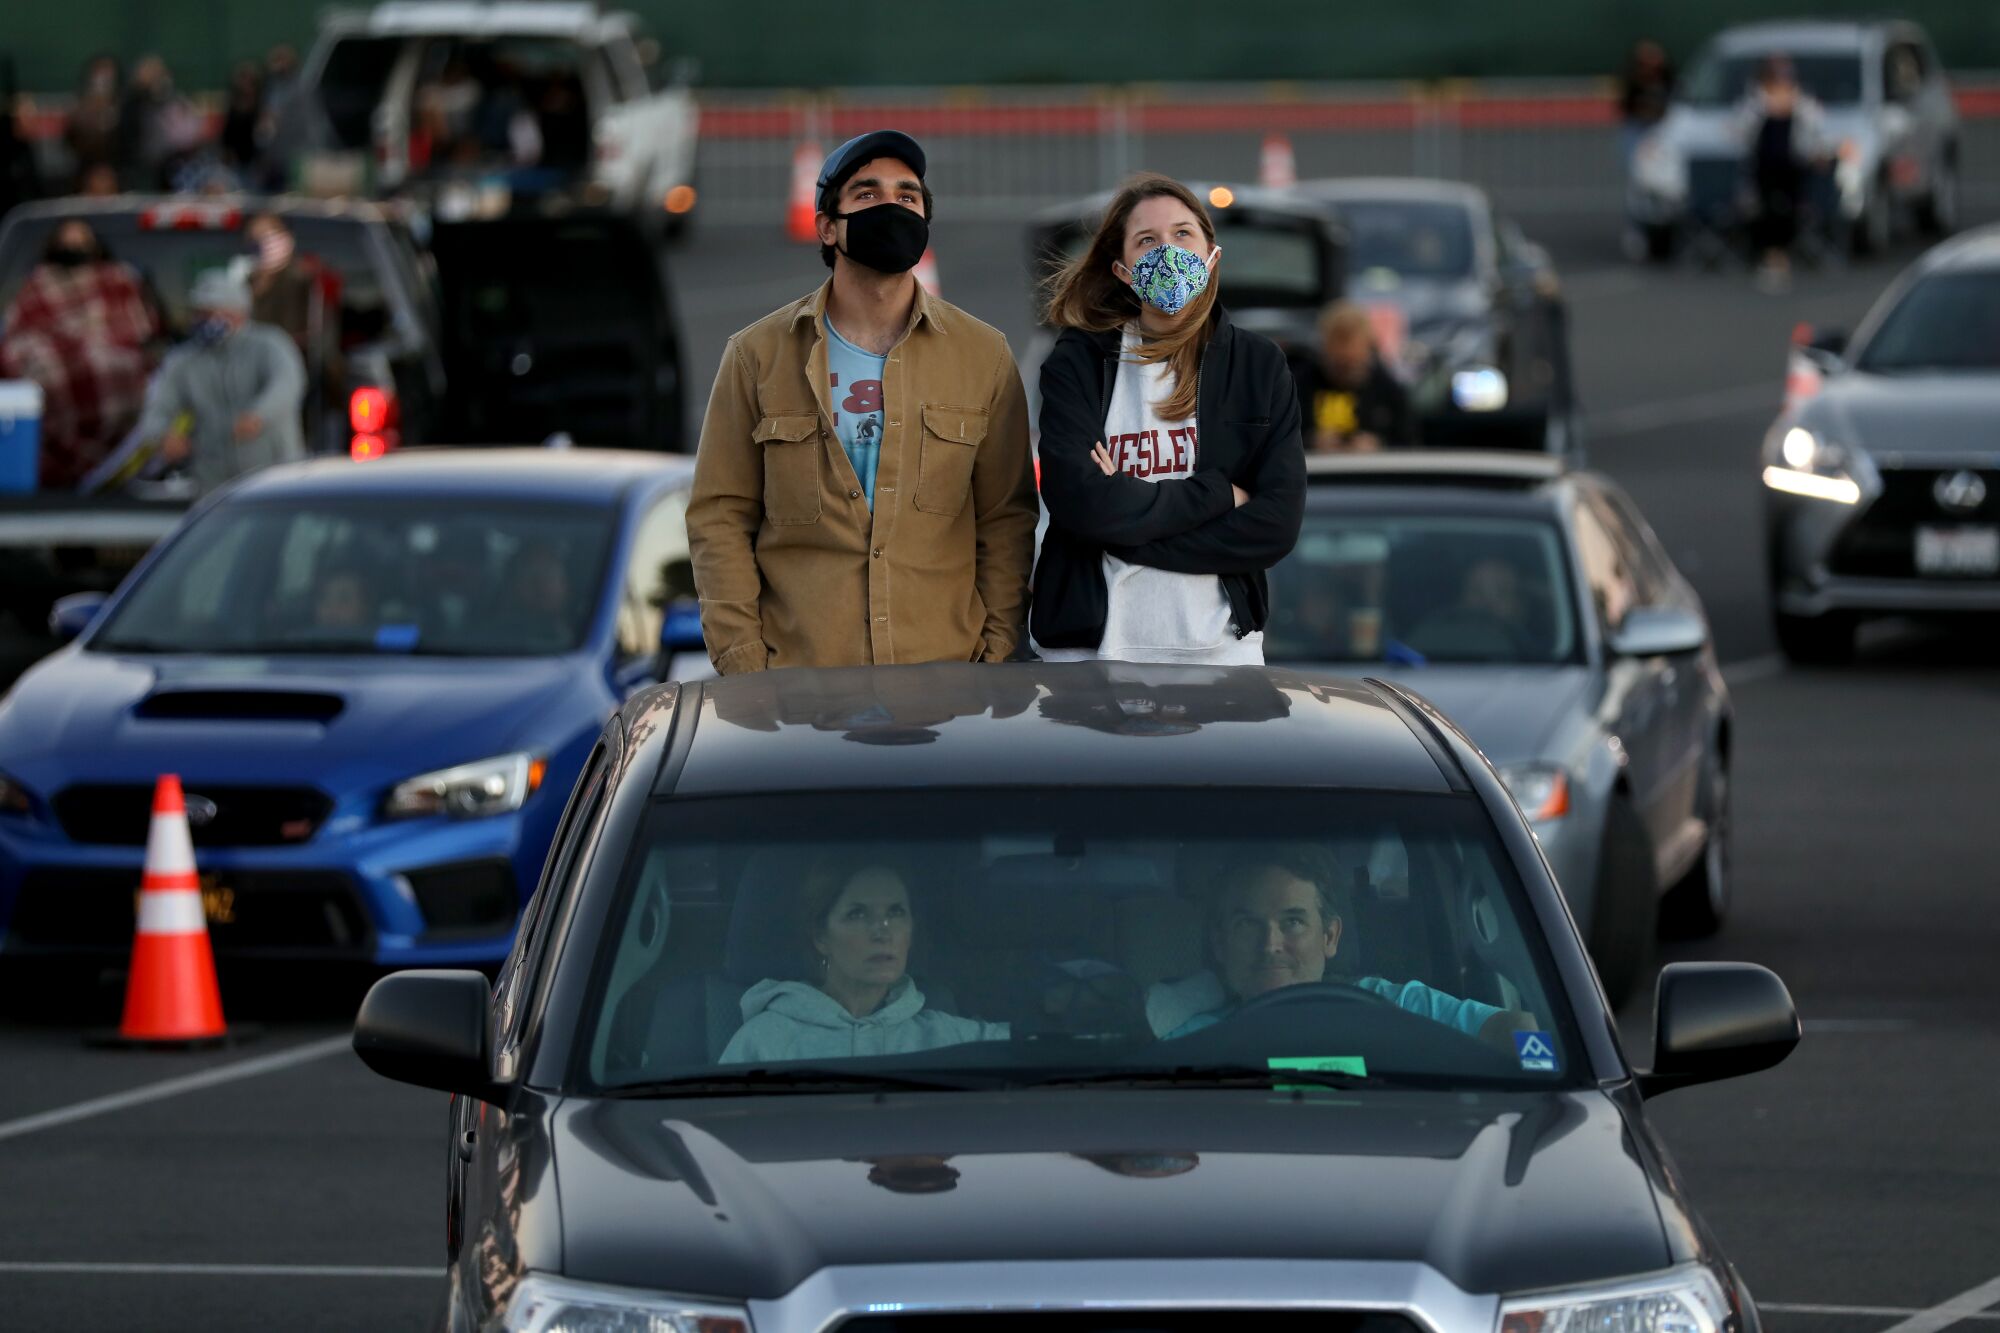 Concertgoers listen to Ozomatli at a Concerts in Your Car event at the Ventura County Fairgrounds on July 18, 2020.  